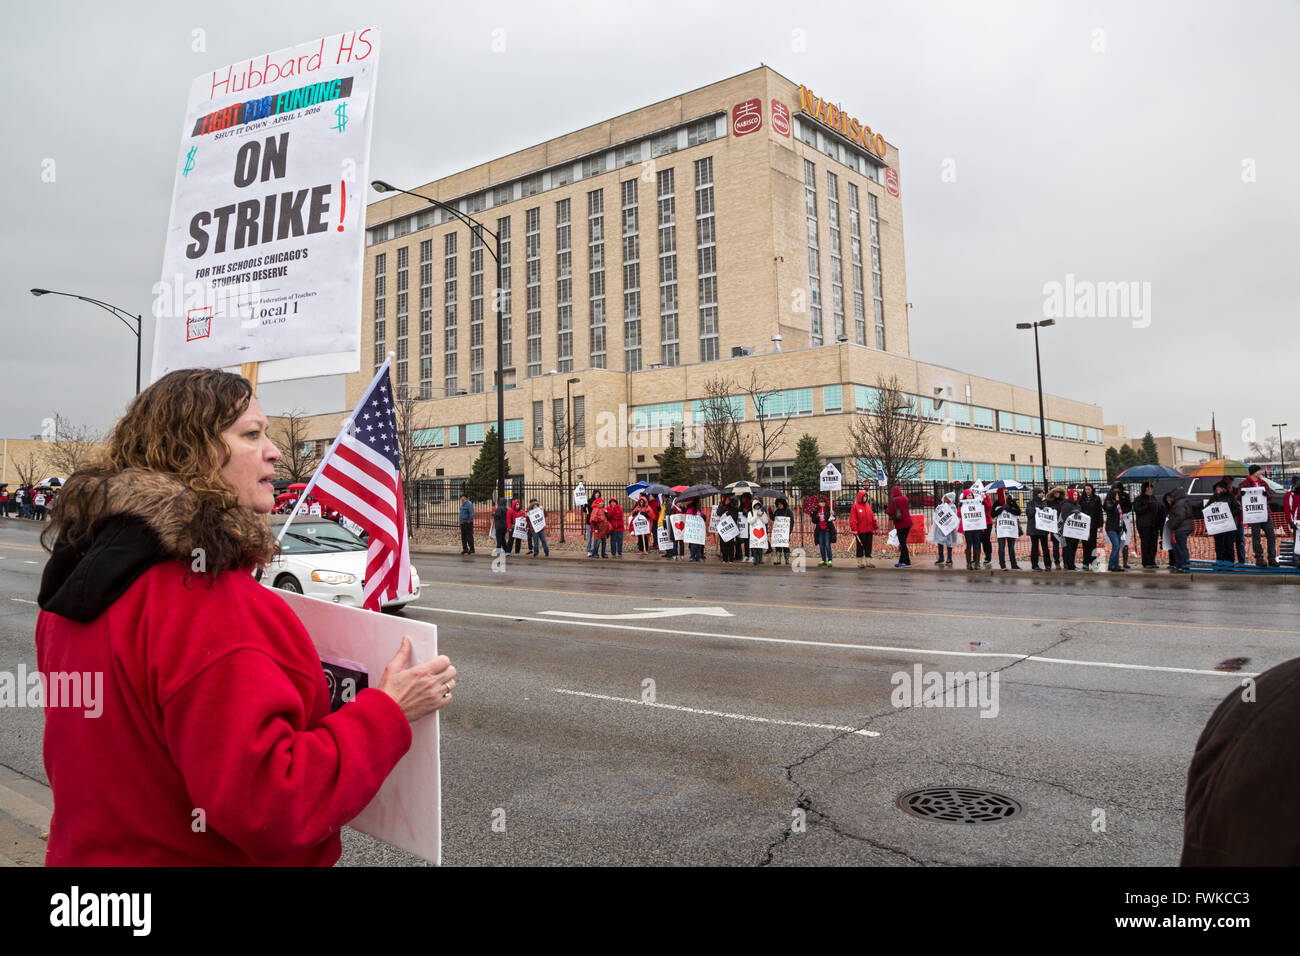 Chicago, Illinois - Striking Chicago teachers joined bakery workers protesting Nabisco's moving 600 jobs to Mexico. Stock Photo